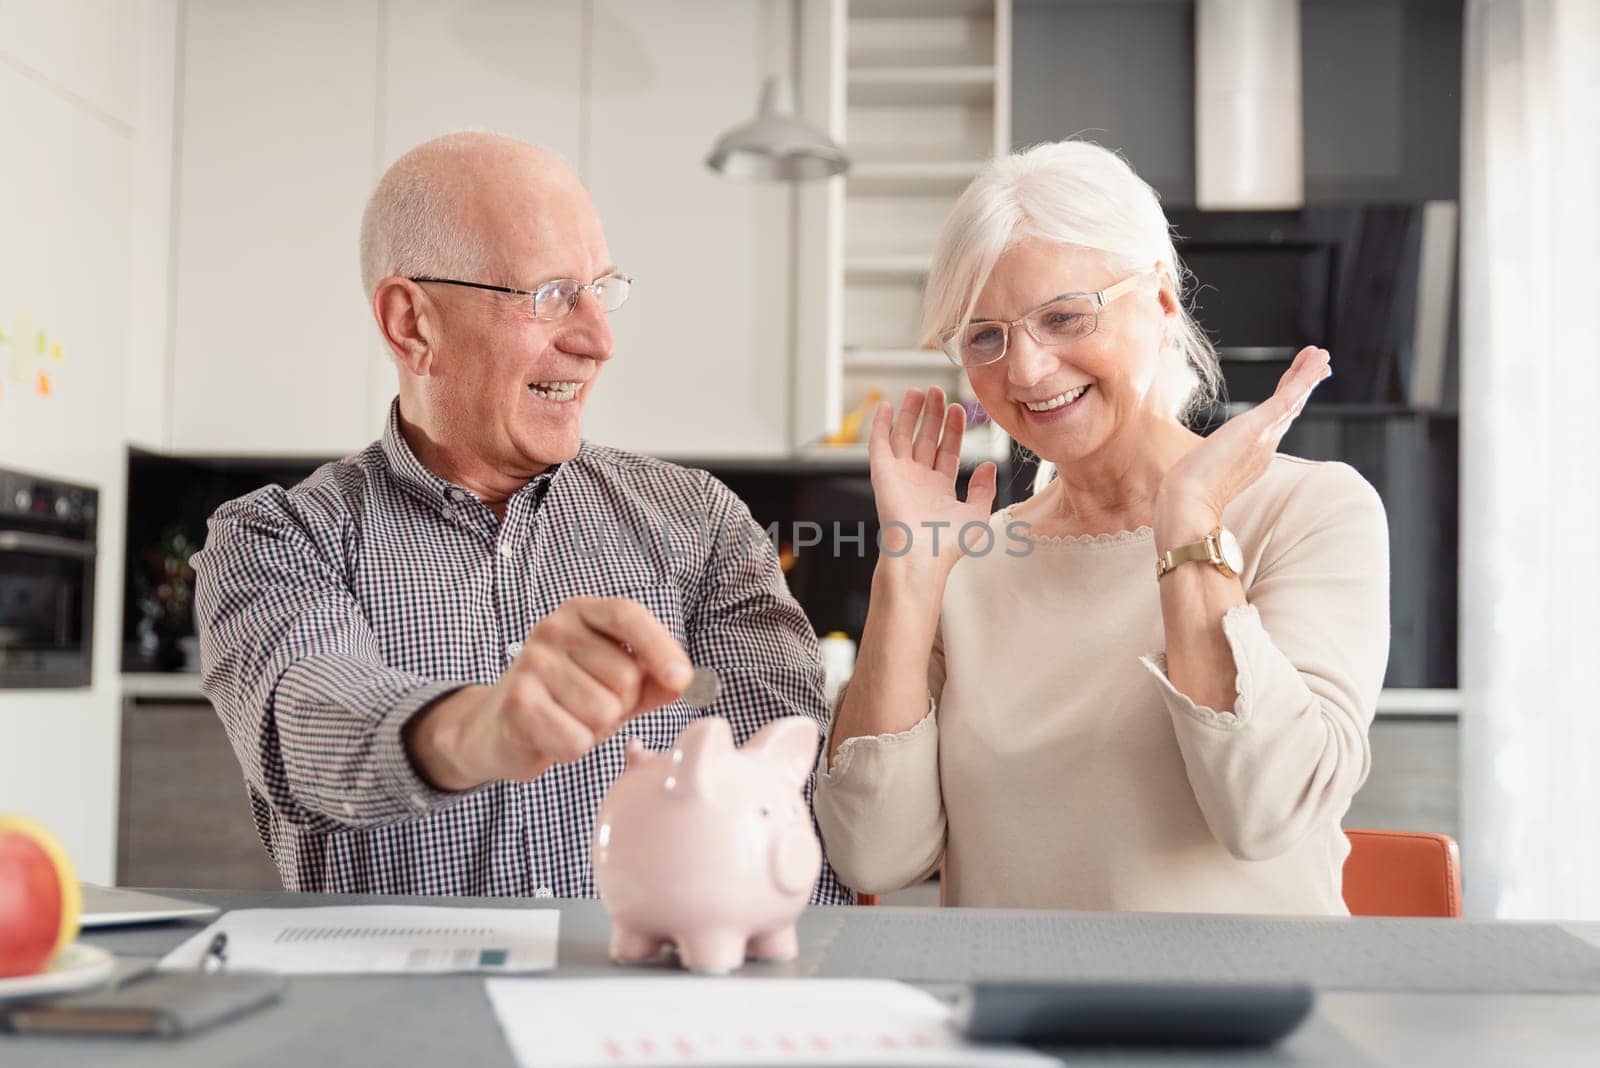 Funny photo of mature couple putting coin into piggy bank at home. Savings, pension plan concept